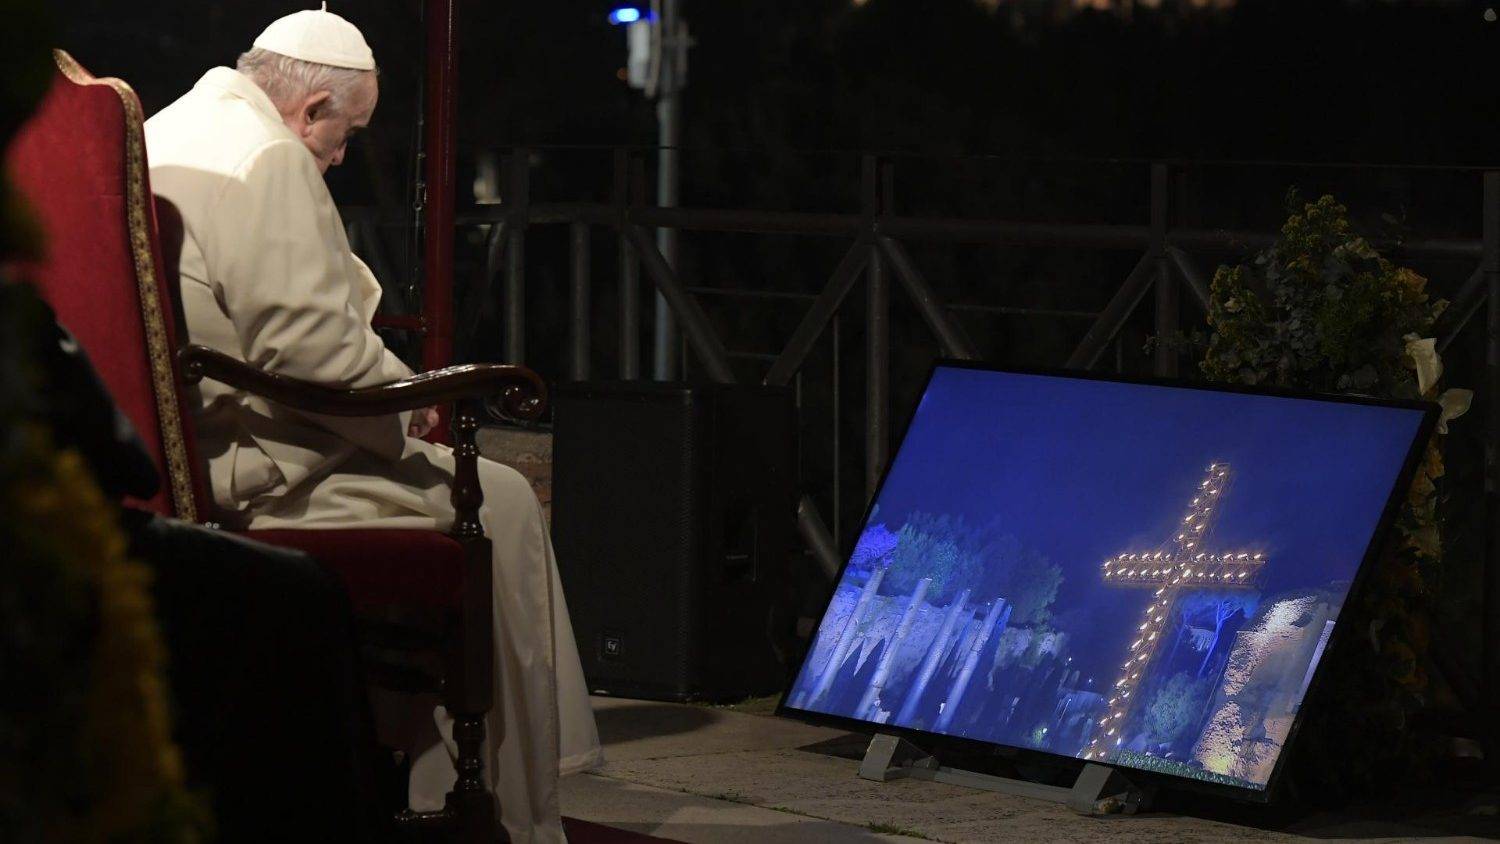 Pope Francis leads the praying of the Via Crucis at Rome's Colosseum on April 15, 2022. (Credit: Vatican Media.)